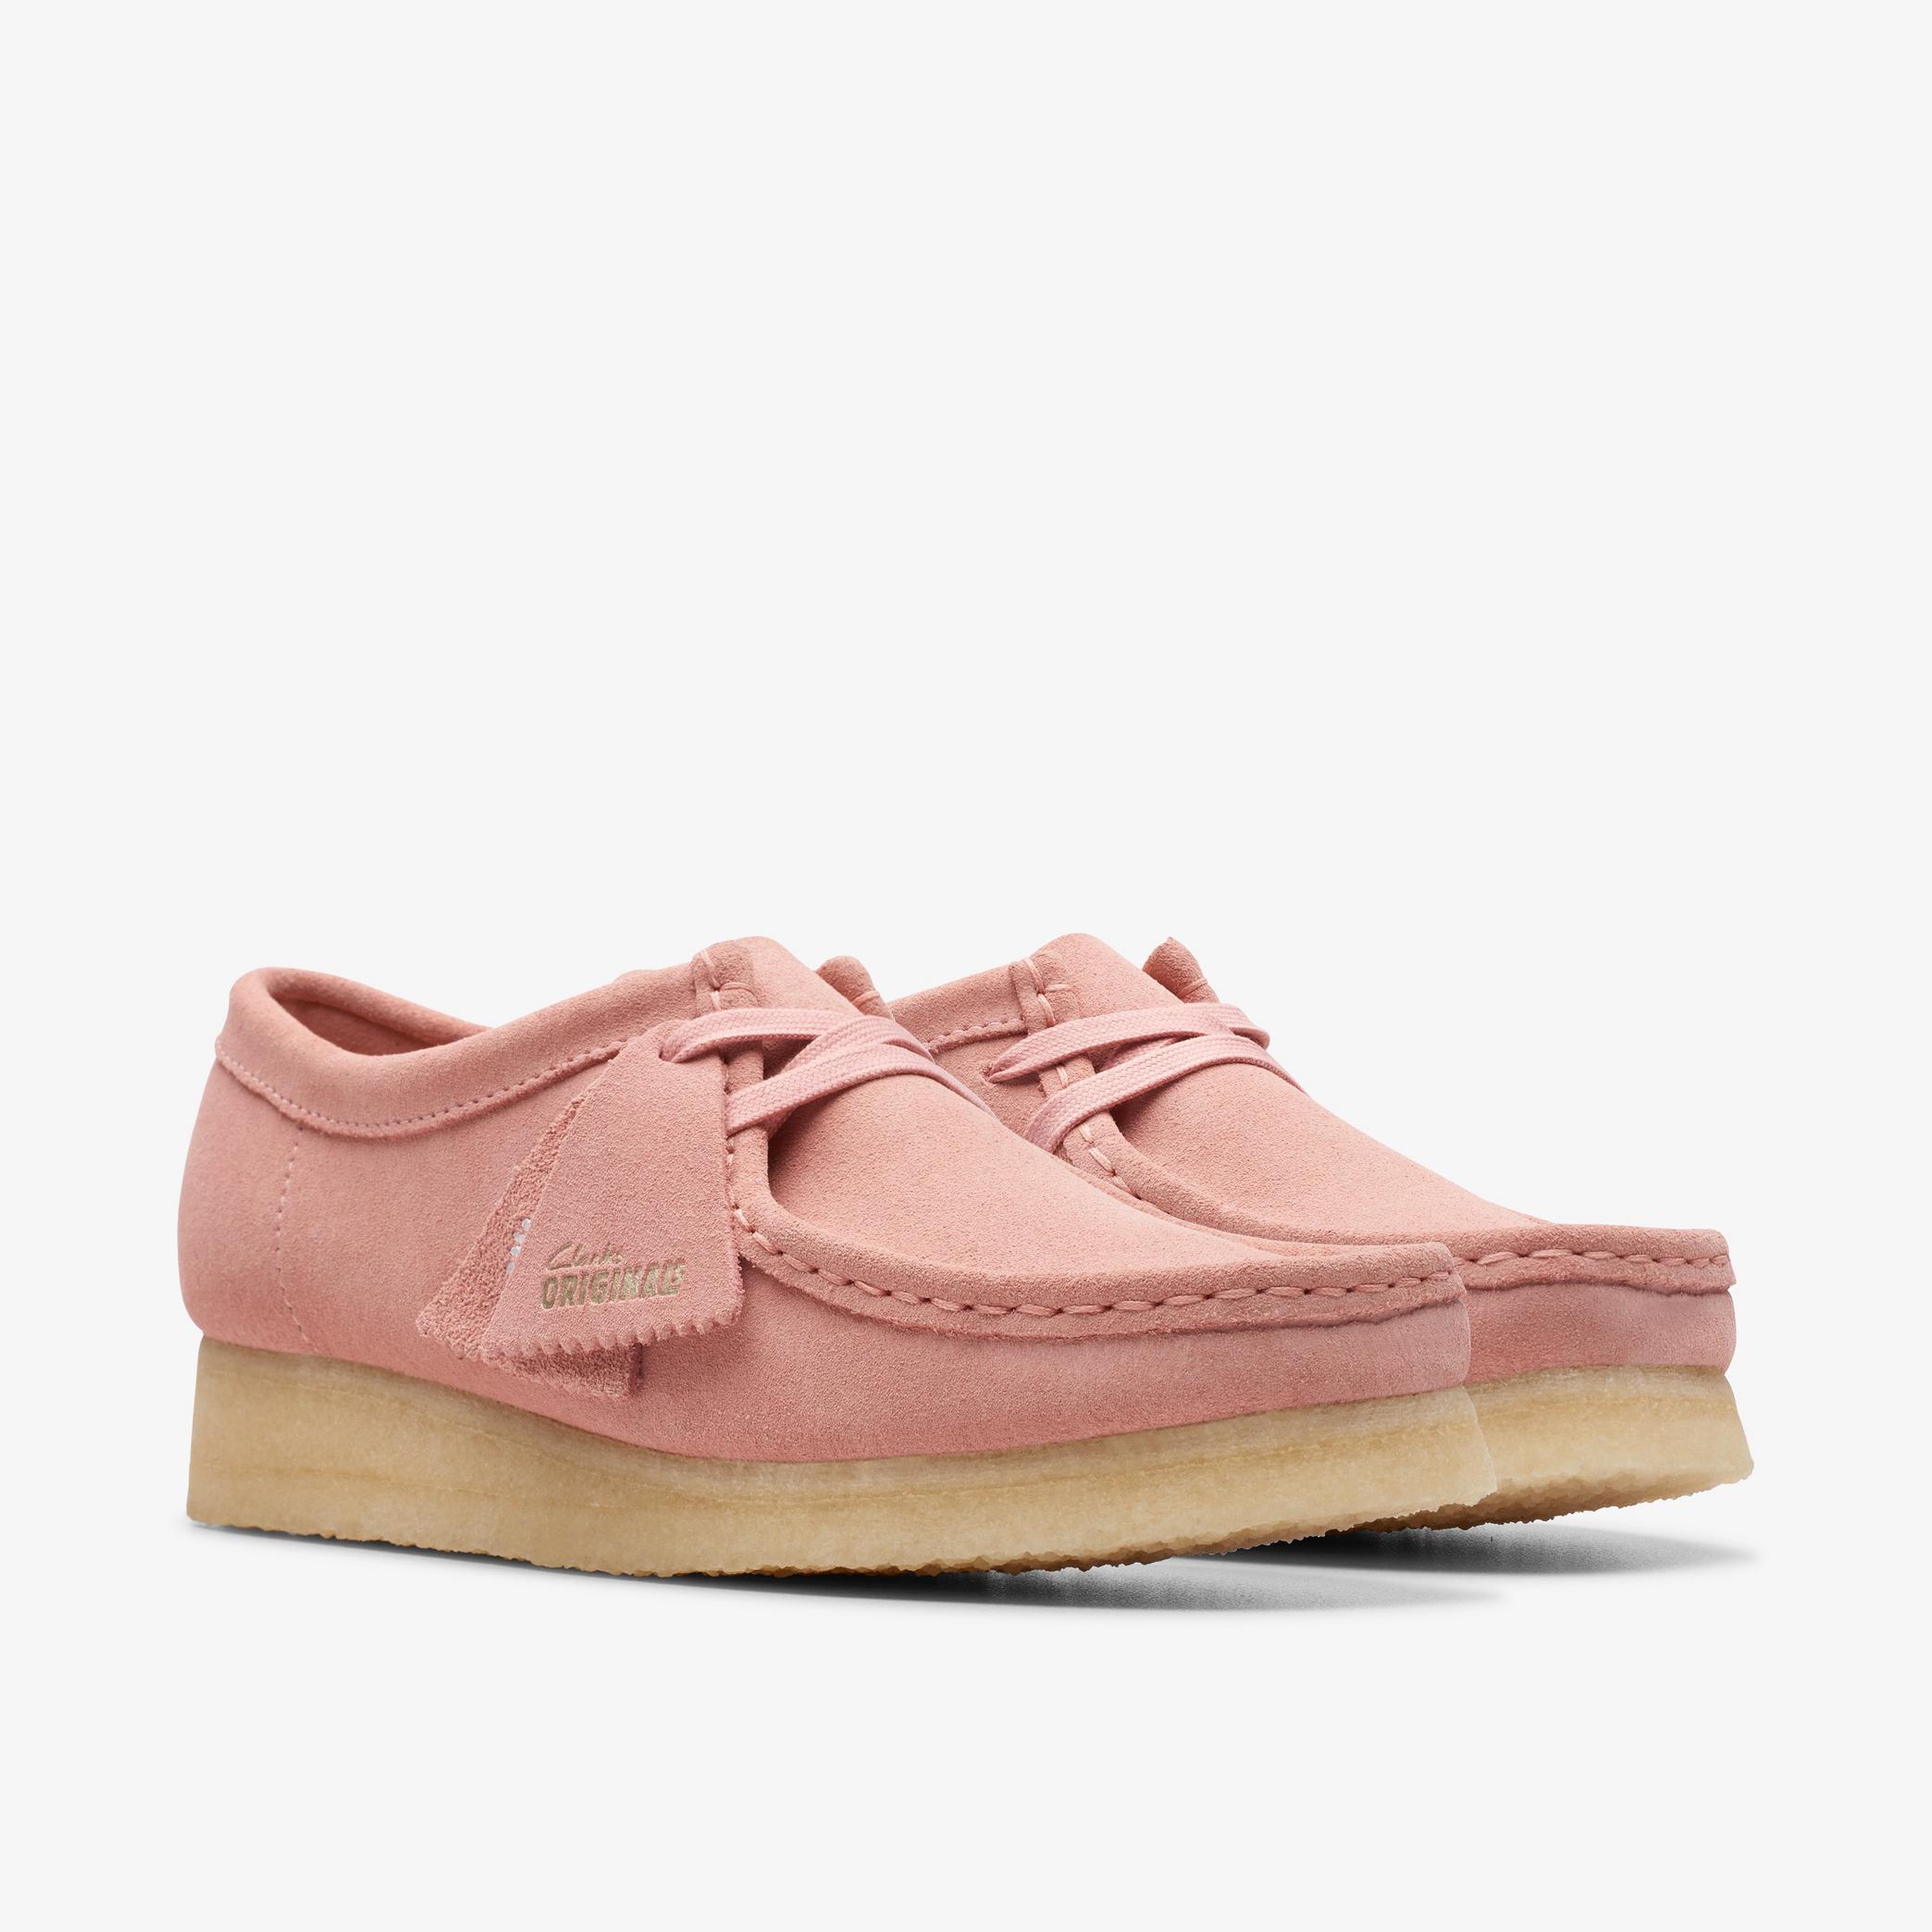 Wallabee Blush Pink Suede Wallabee, view 4 of 7